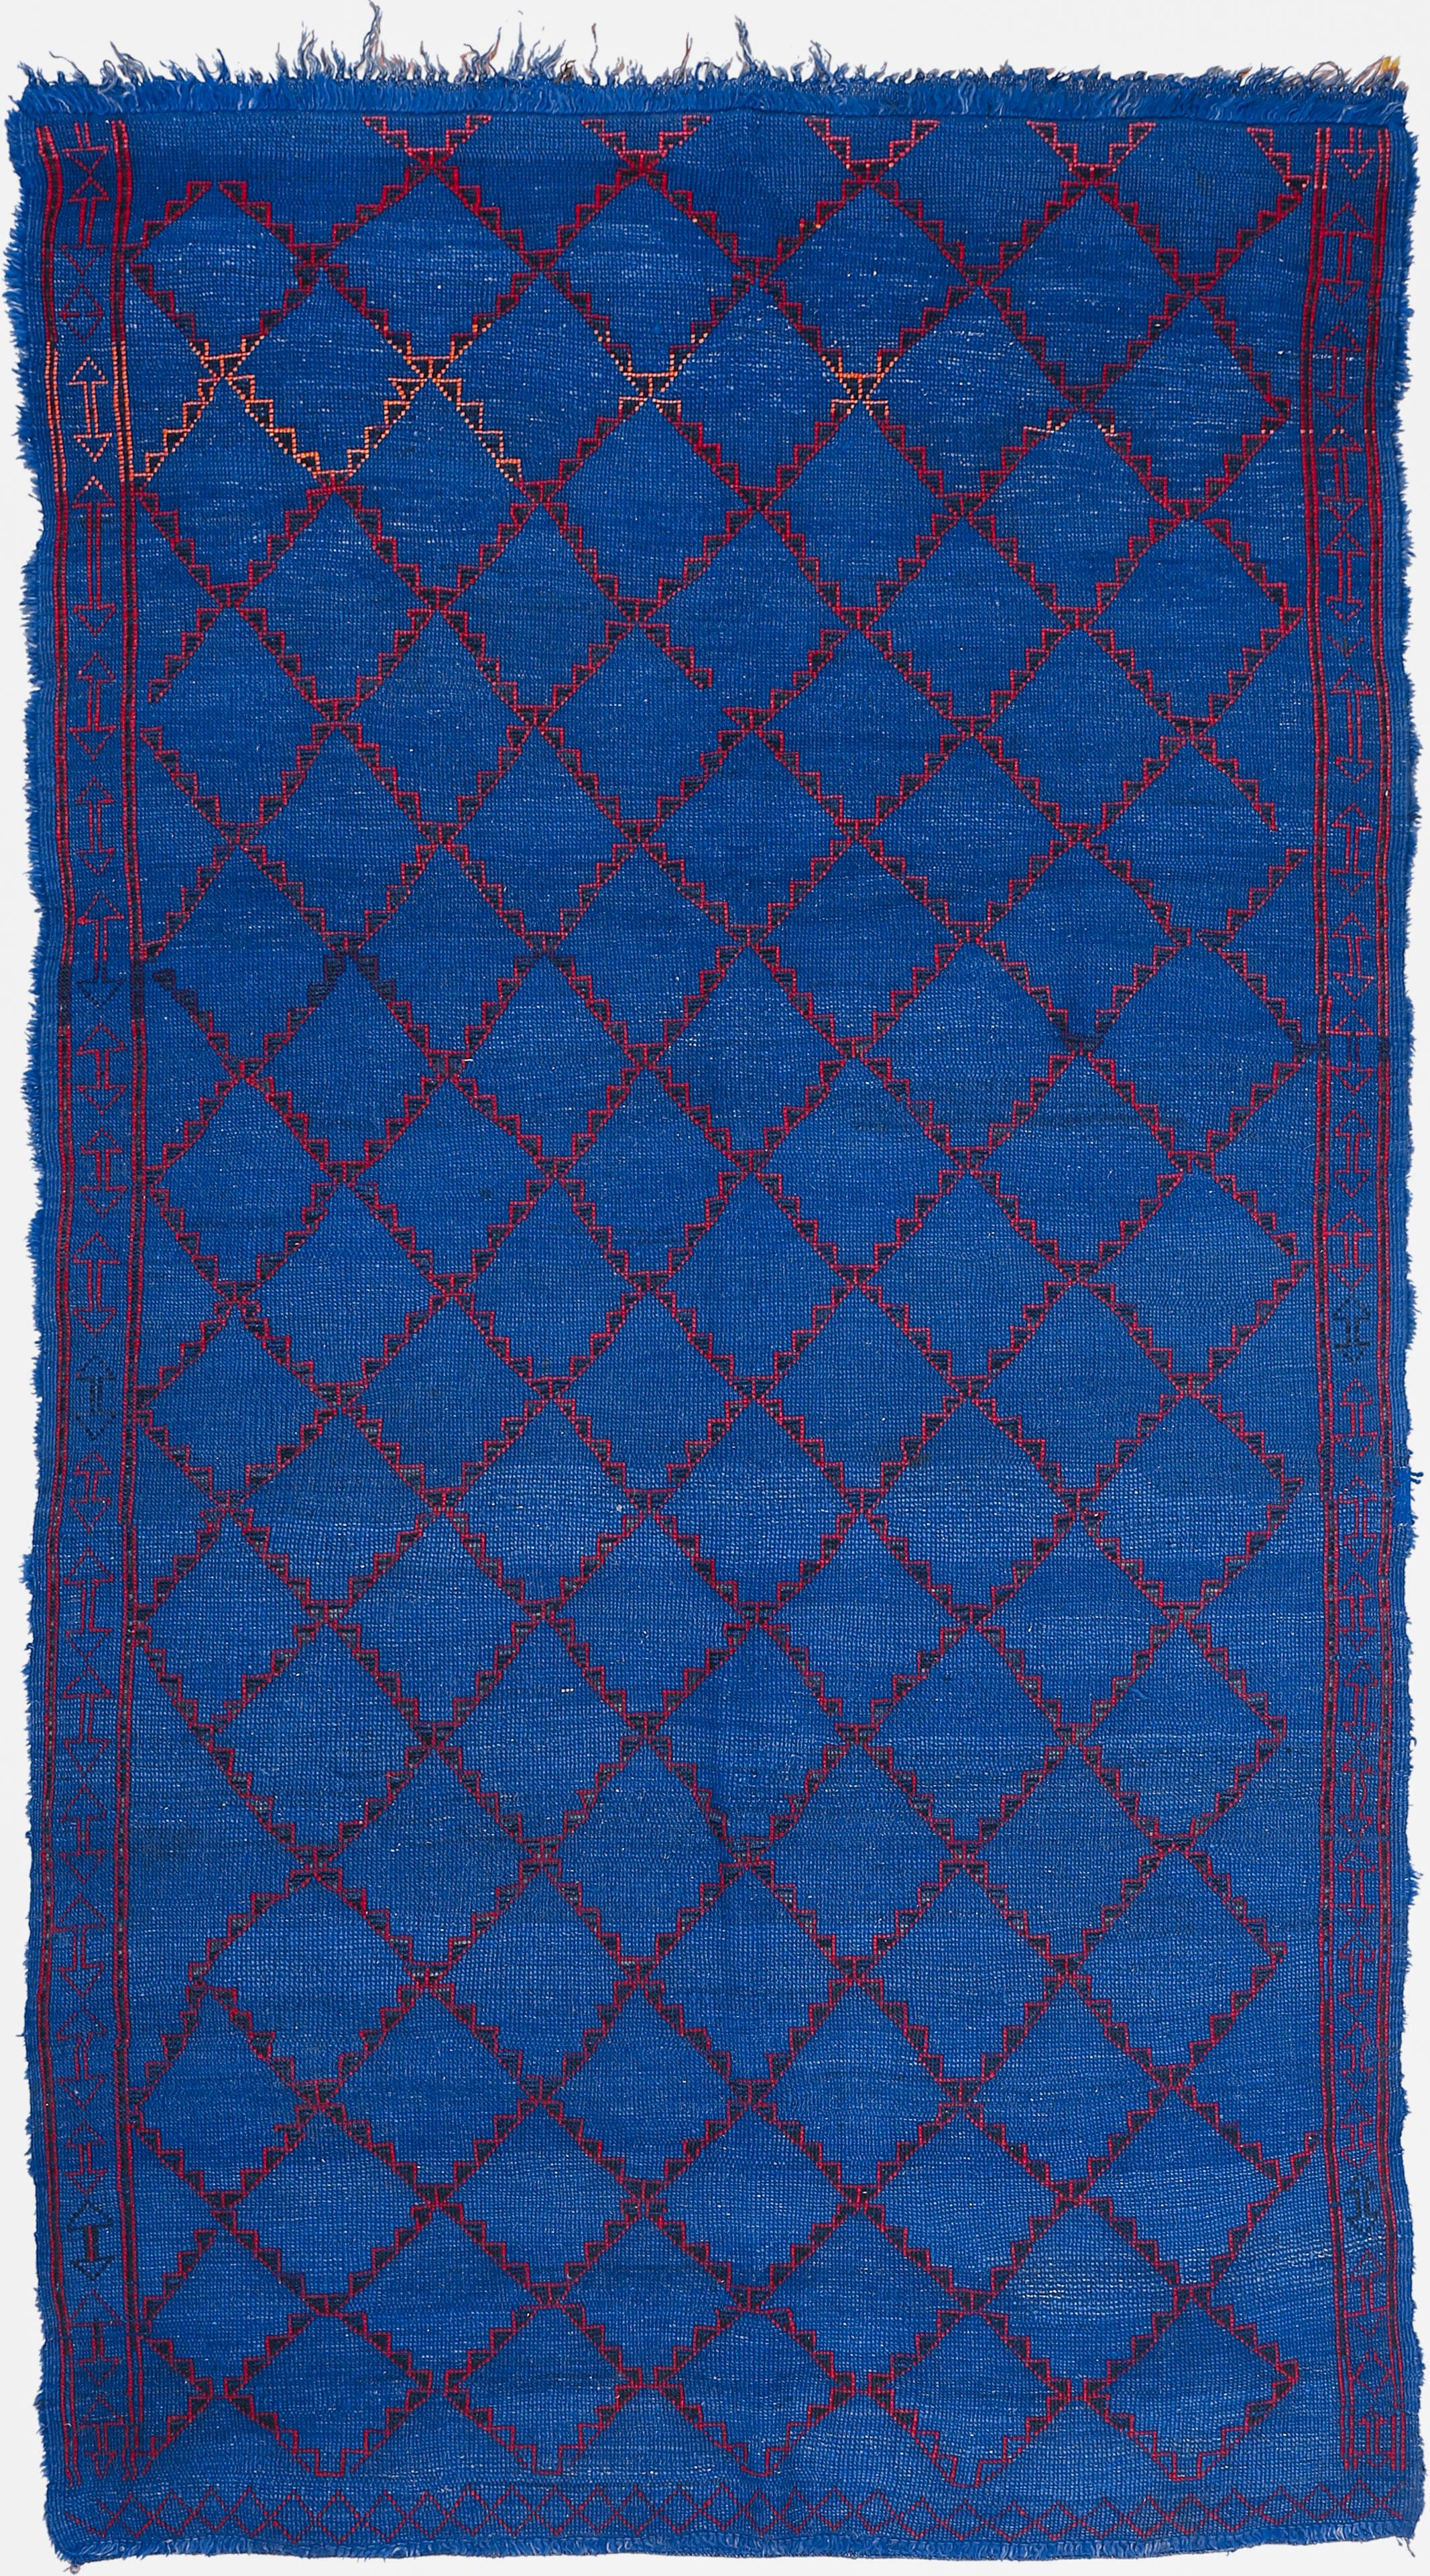 An authentic old Berber rug from the Middle Atlas Mountains, home of the Beni Mguild tribal confederacy, who are known to weave the best quality wool carpets of Morocco. Characterized by an all-over pattern of diamonds, the red offers a perfect